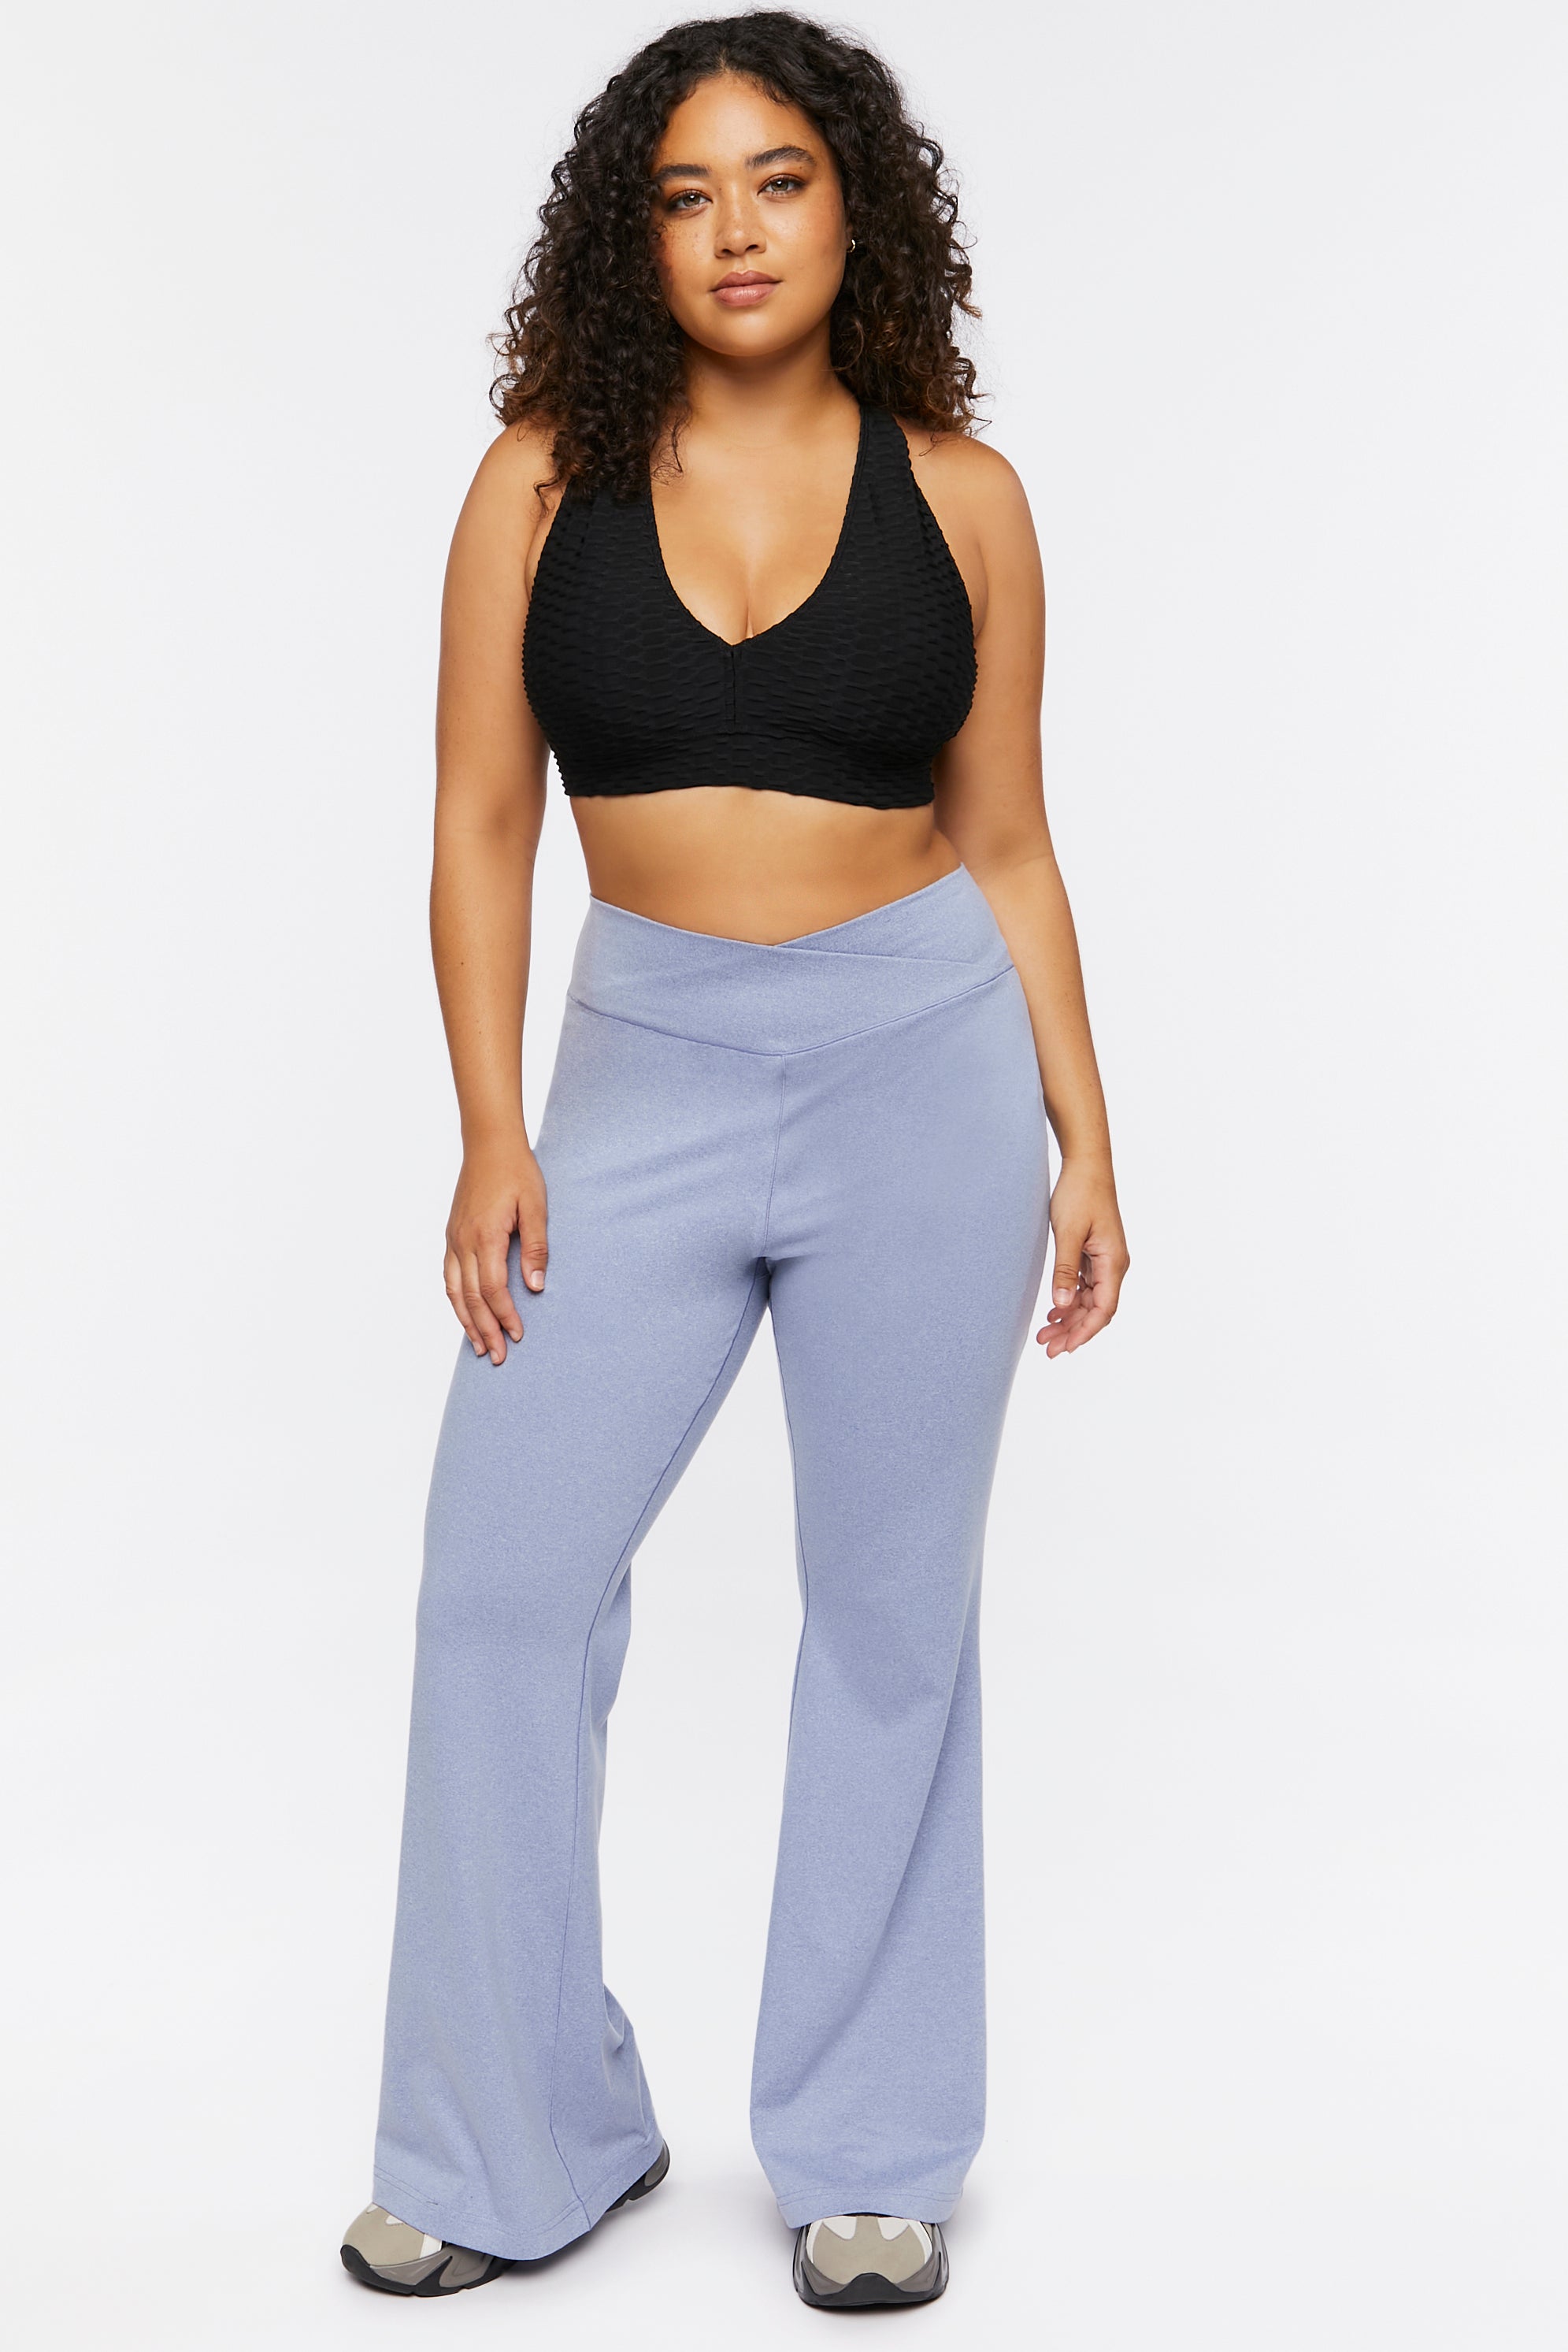 Bluemirage Plus Size Crossover Flare Pants 